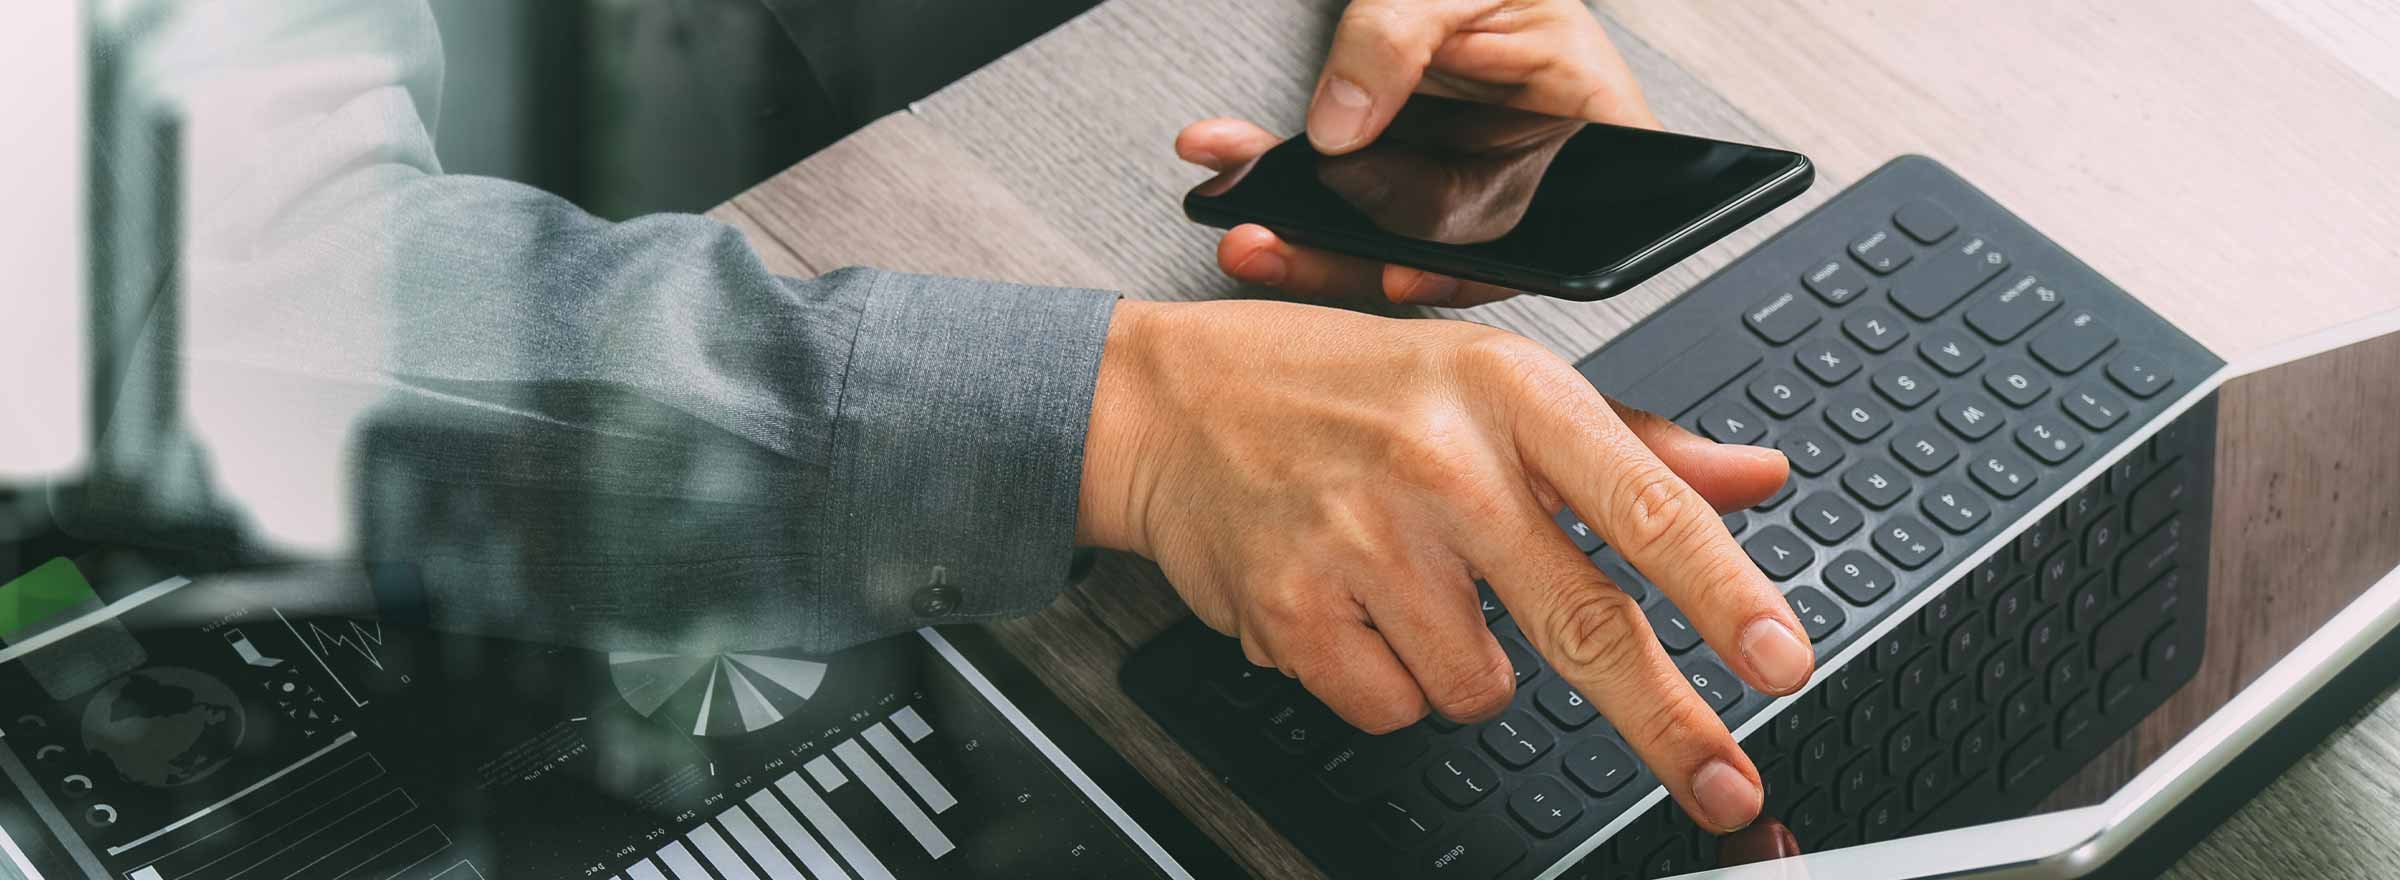 hands of a man using both a smartphone and a laptop